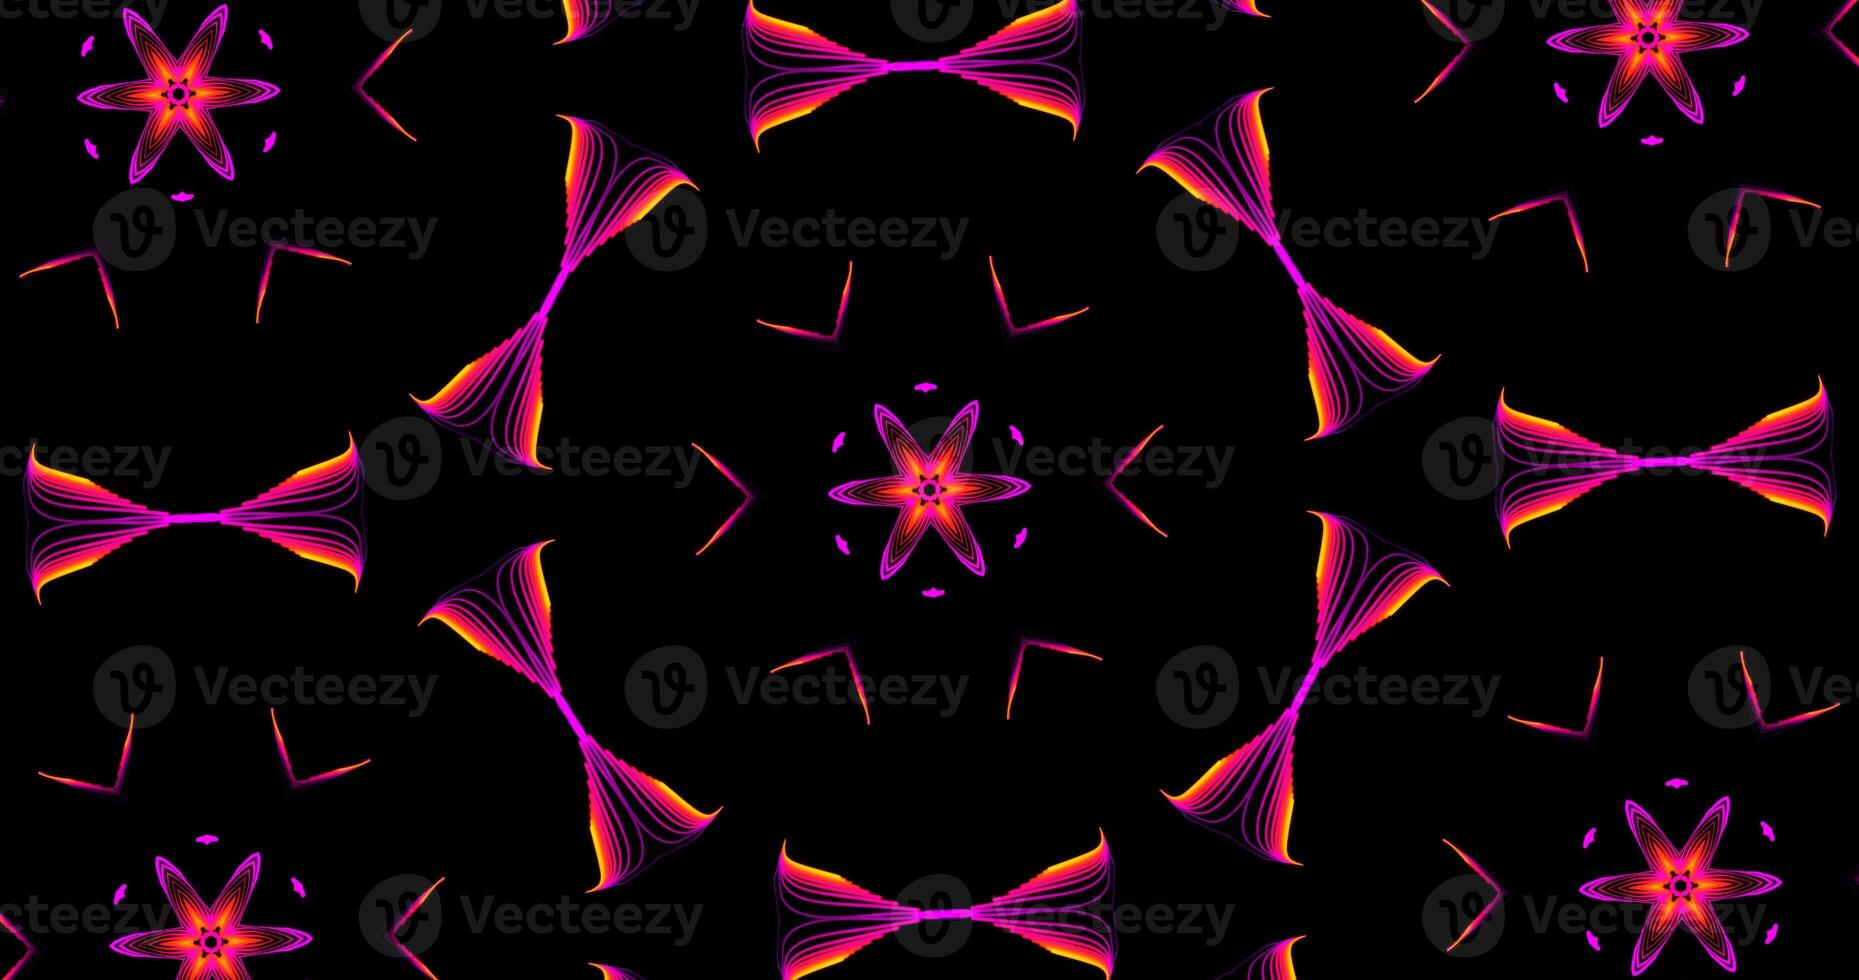 Abstract Kaleidoscope Patterns On Dark Background In Purple Red Yellow Lines photo